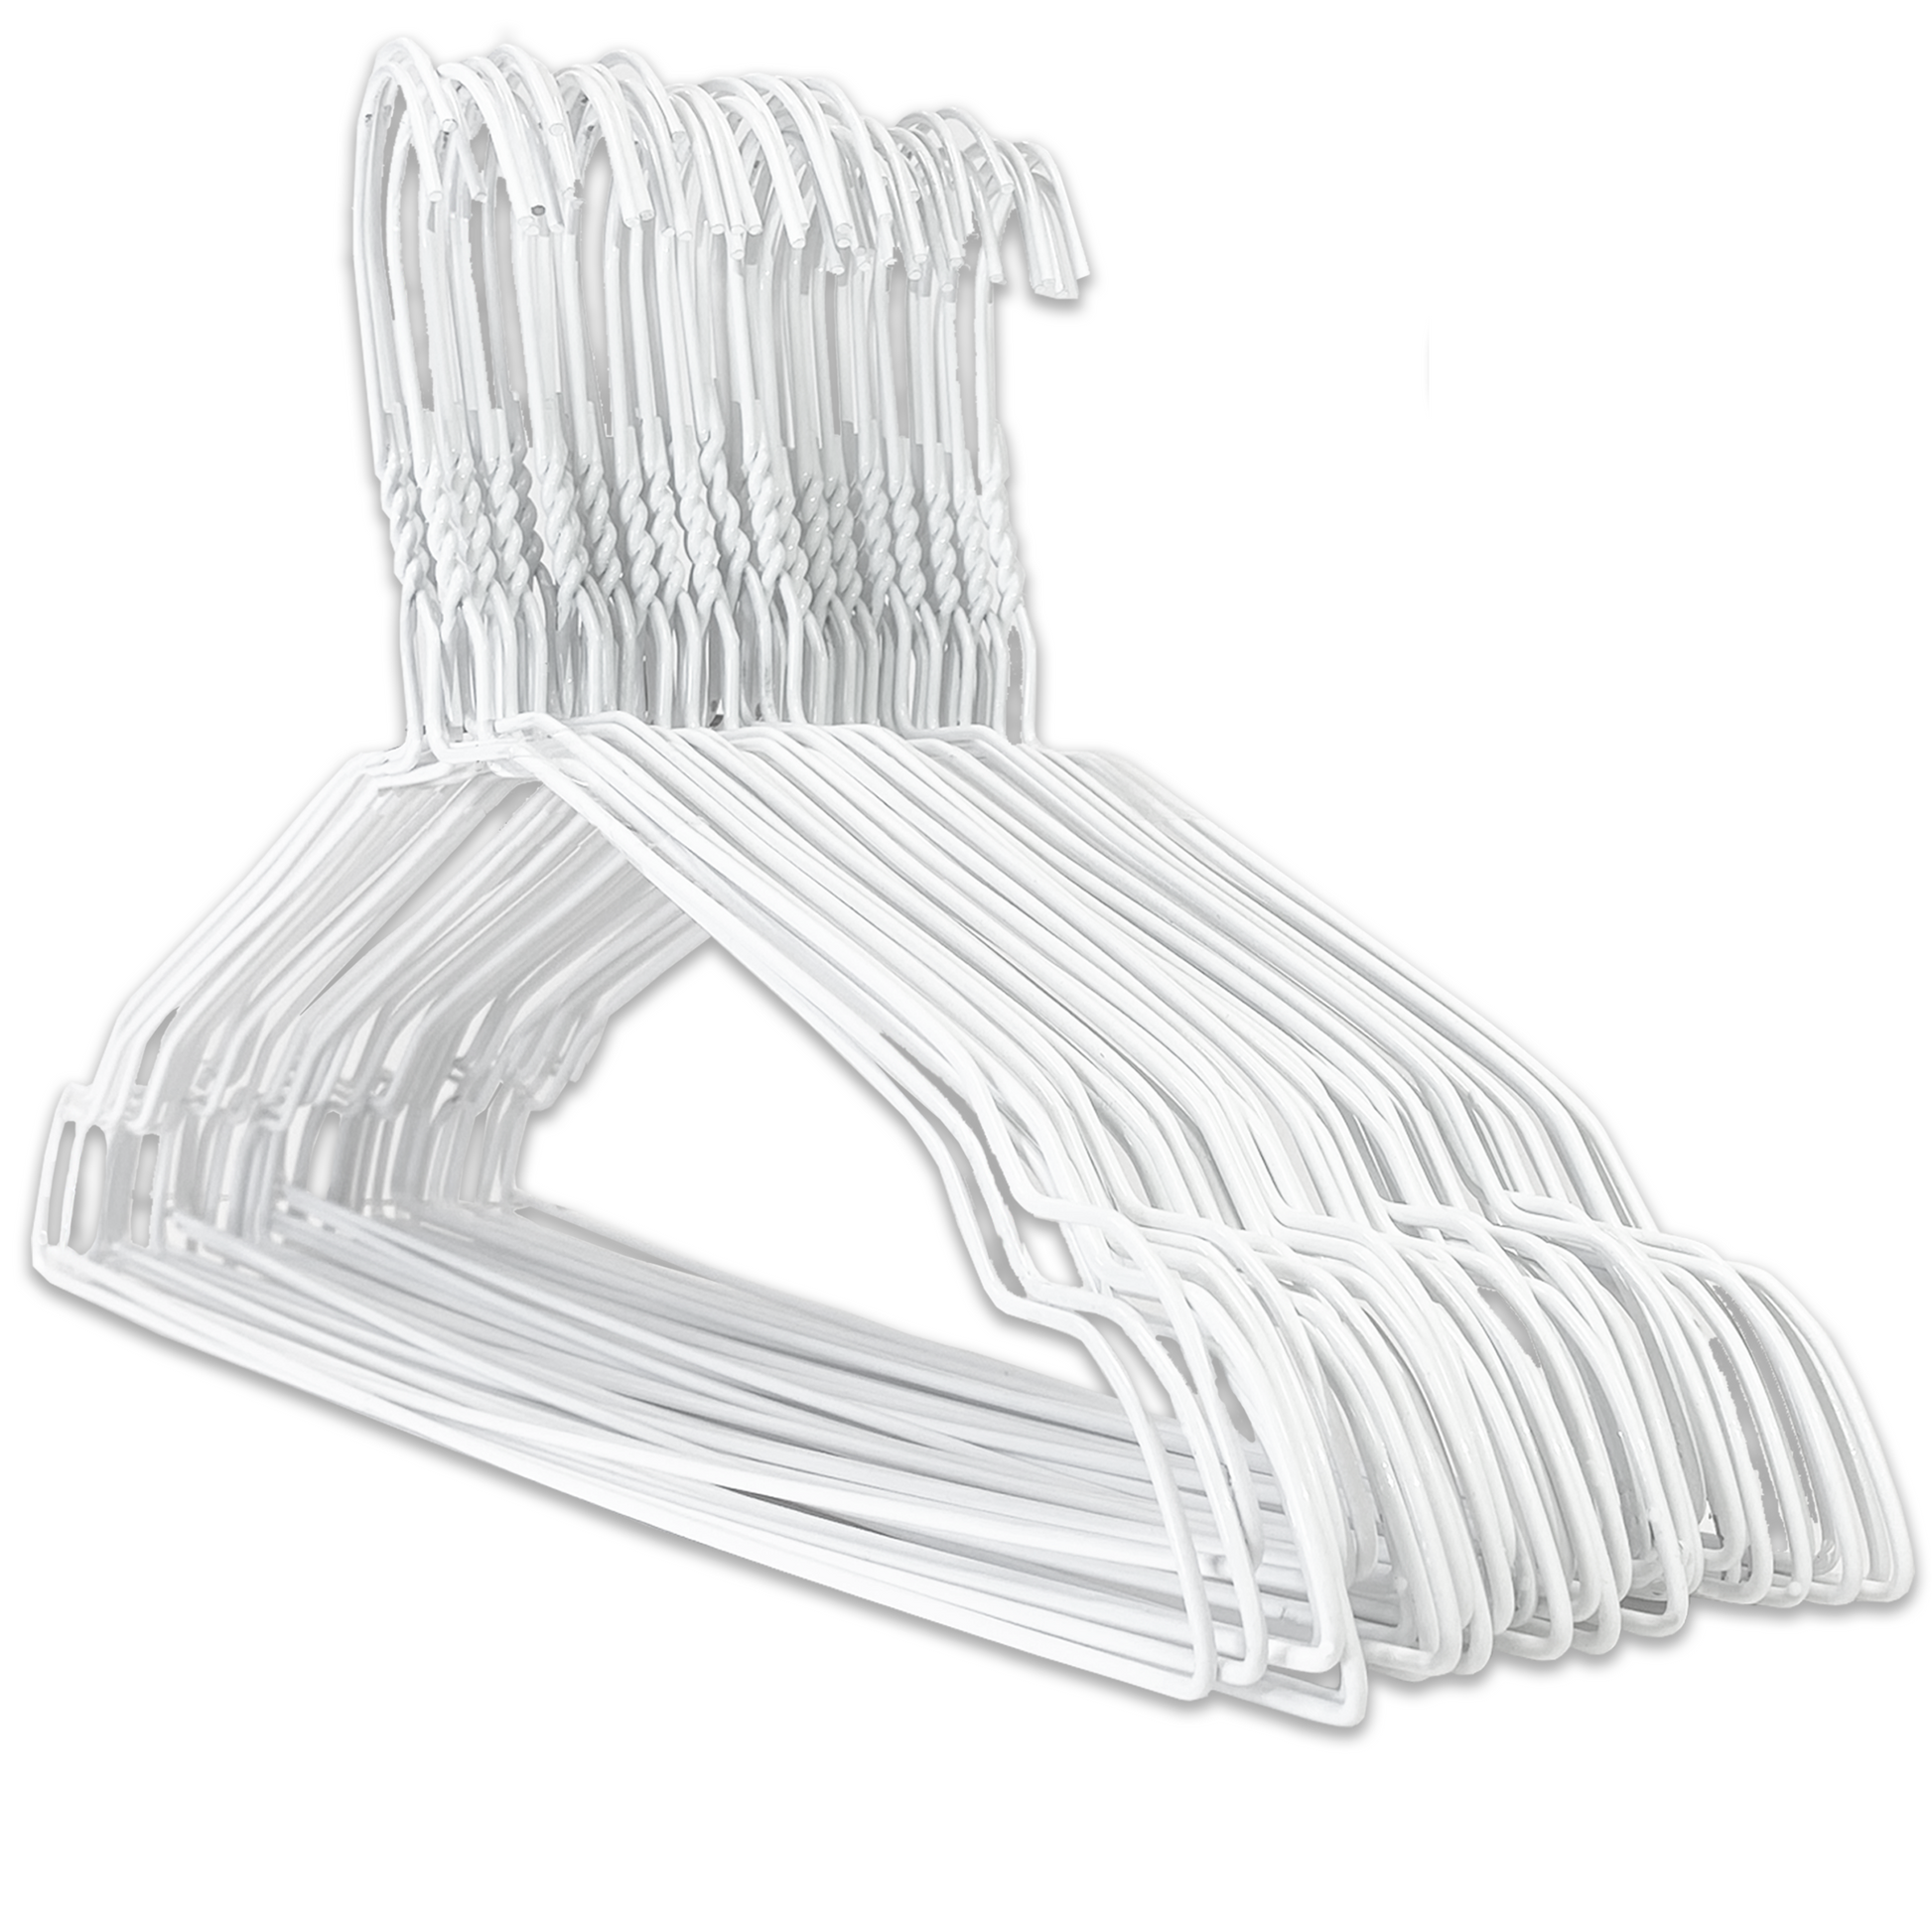 White Wire Coat Hangers  Space-Saving & Economical Clothes